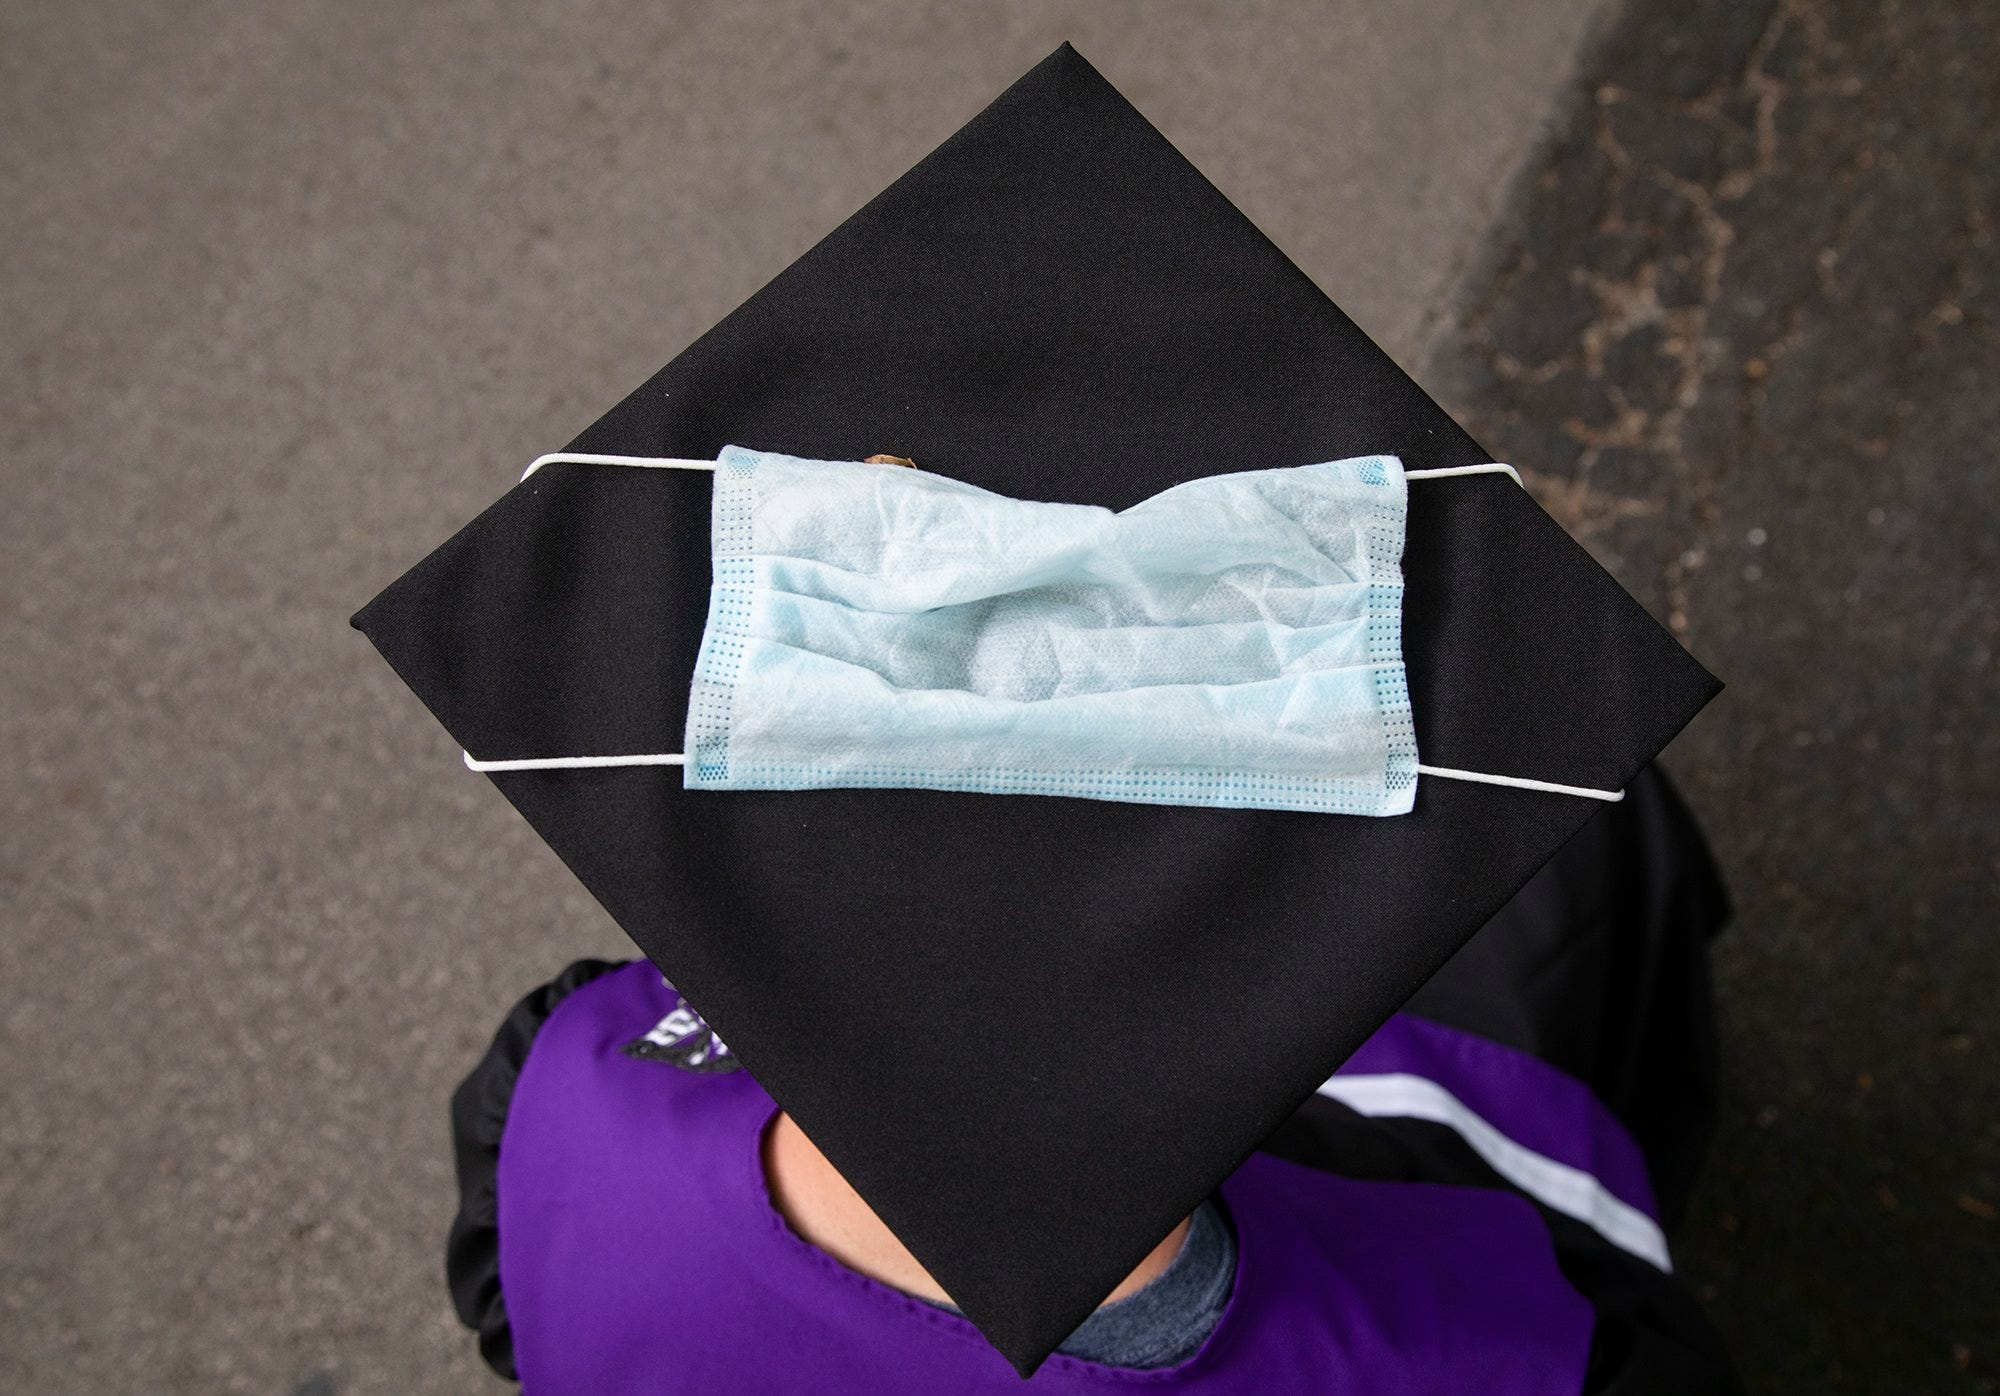 Liberal Arts and Science Academy Champ Turner sports a mask on his graduation cap while participating in a block graduation ceremony on May 29, 2020, in Hyde Park. All of the seniors live blocks from one another and attended McCallum High School or Liberal Arts and Science Academy.